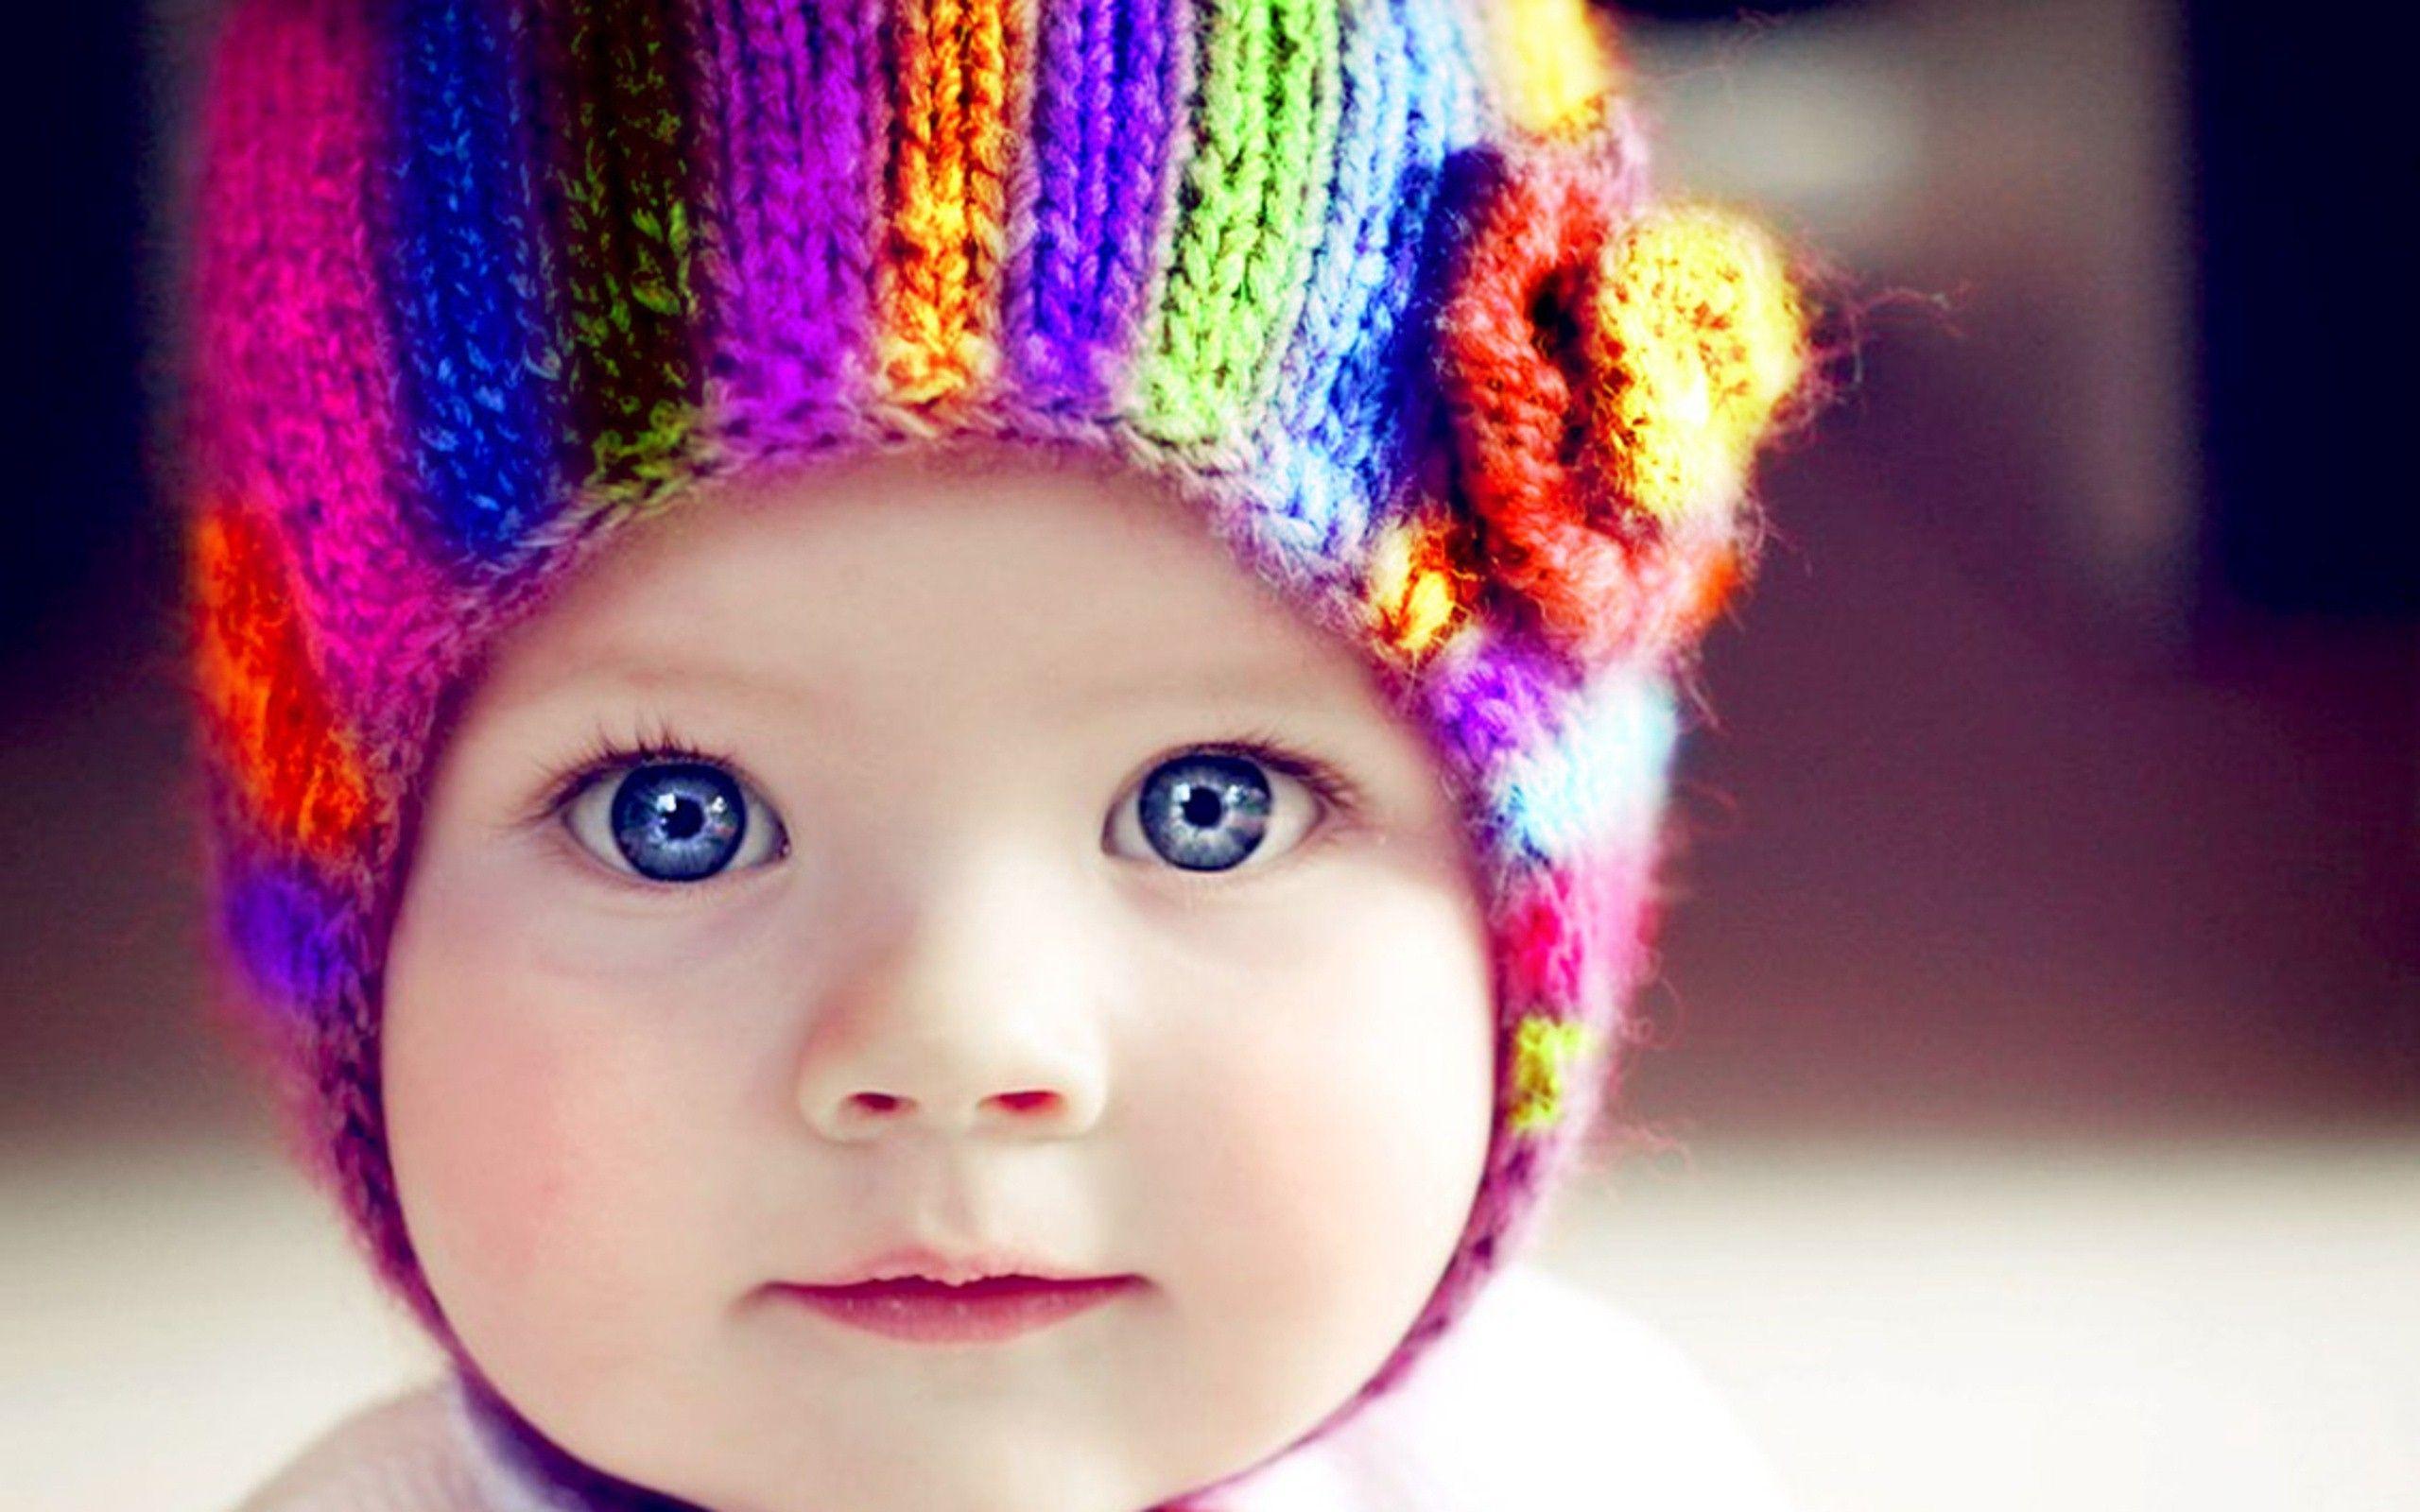 Cute Baby HD Wallpaper Image Picture Photo Download Page 3